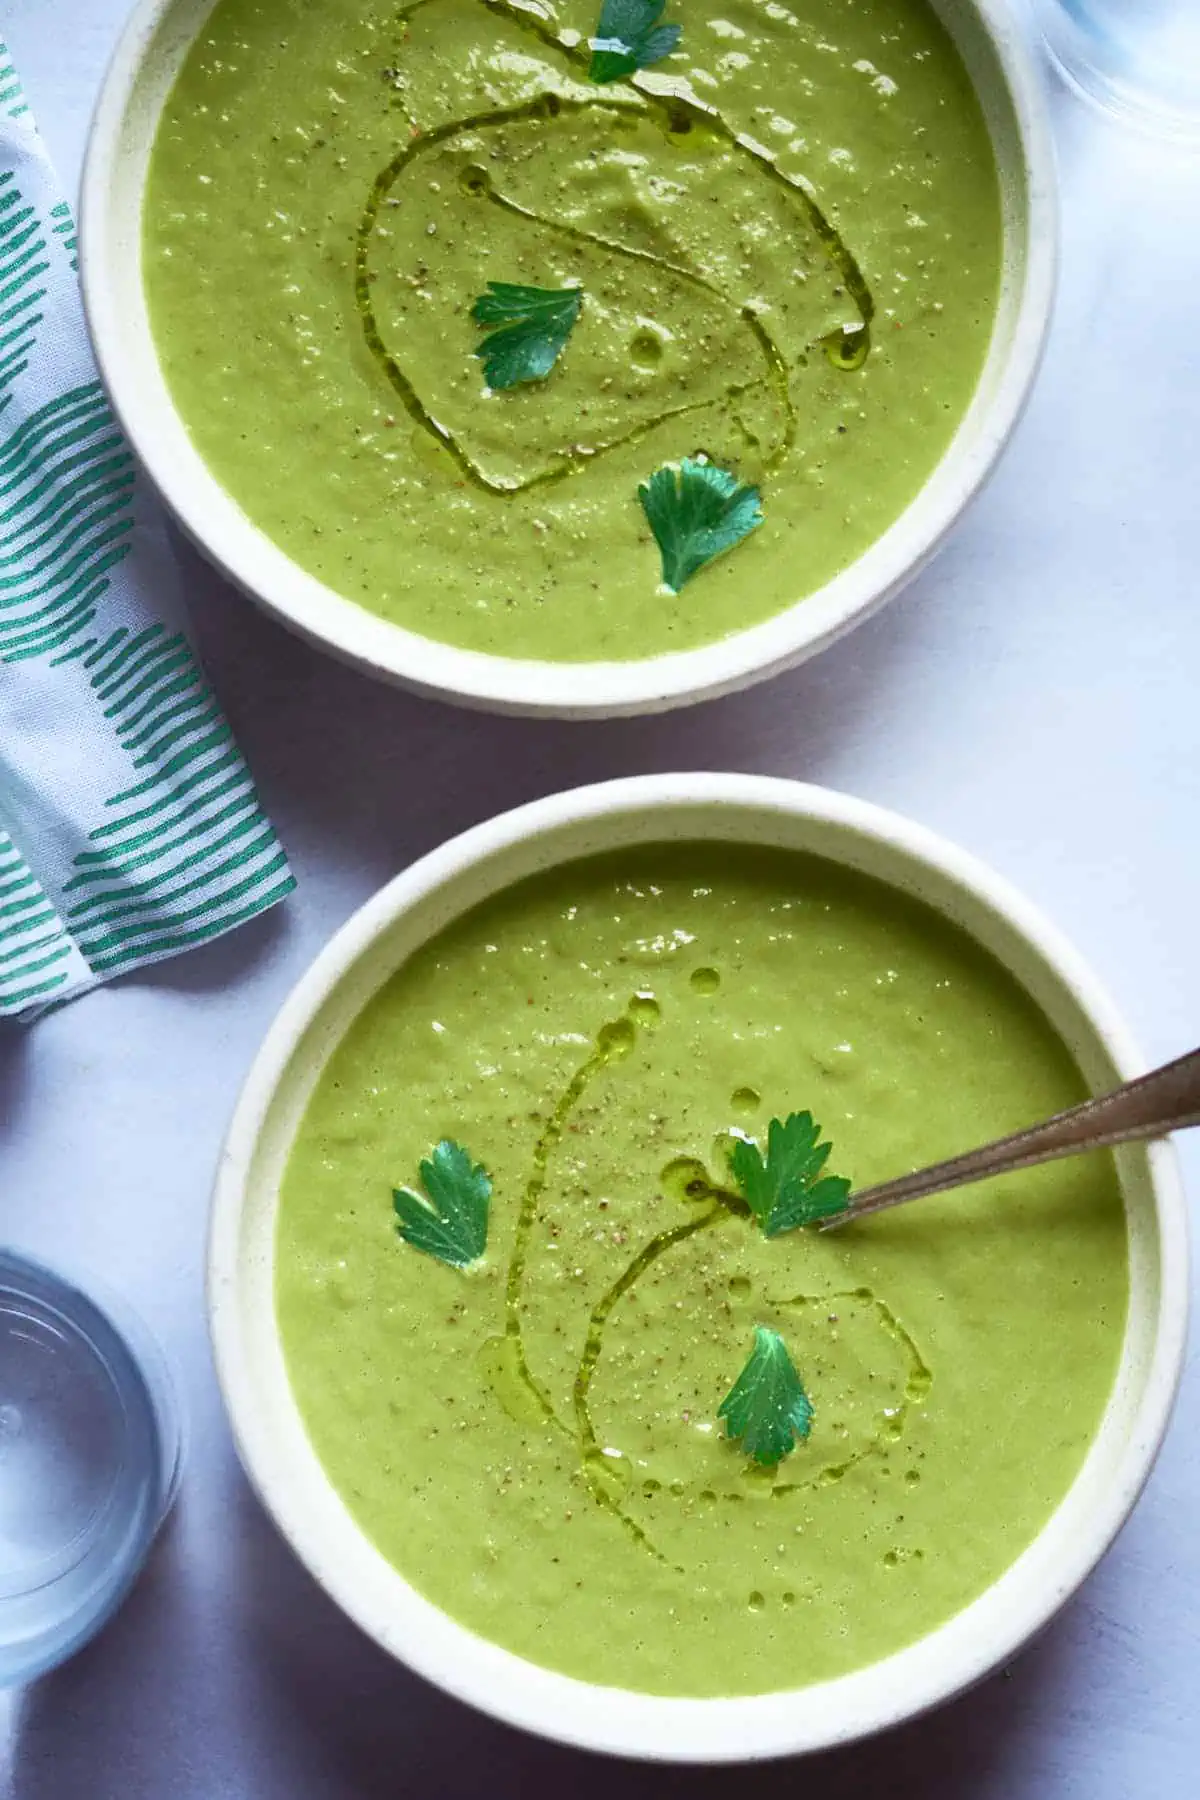 Amazing green soup garnished with fresh herbs and drizzled with olive oil. Great for vegetarians and keto dieters.